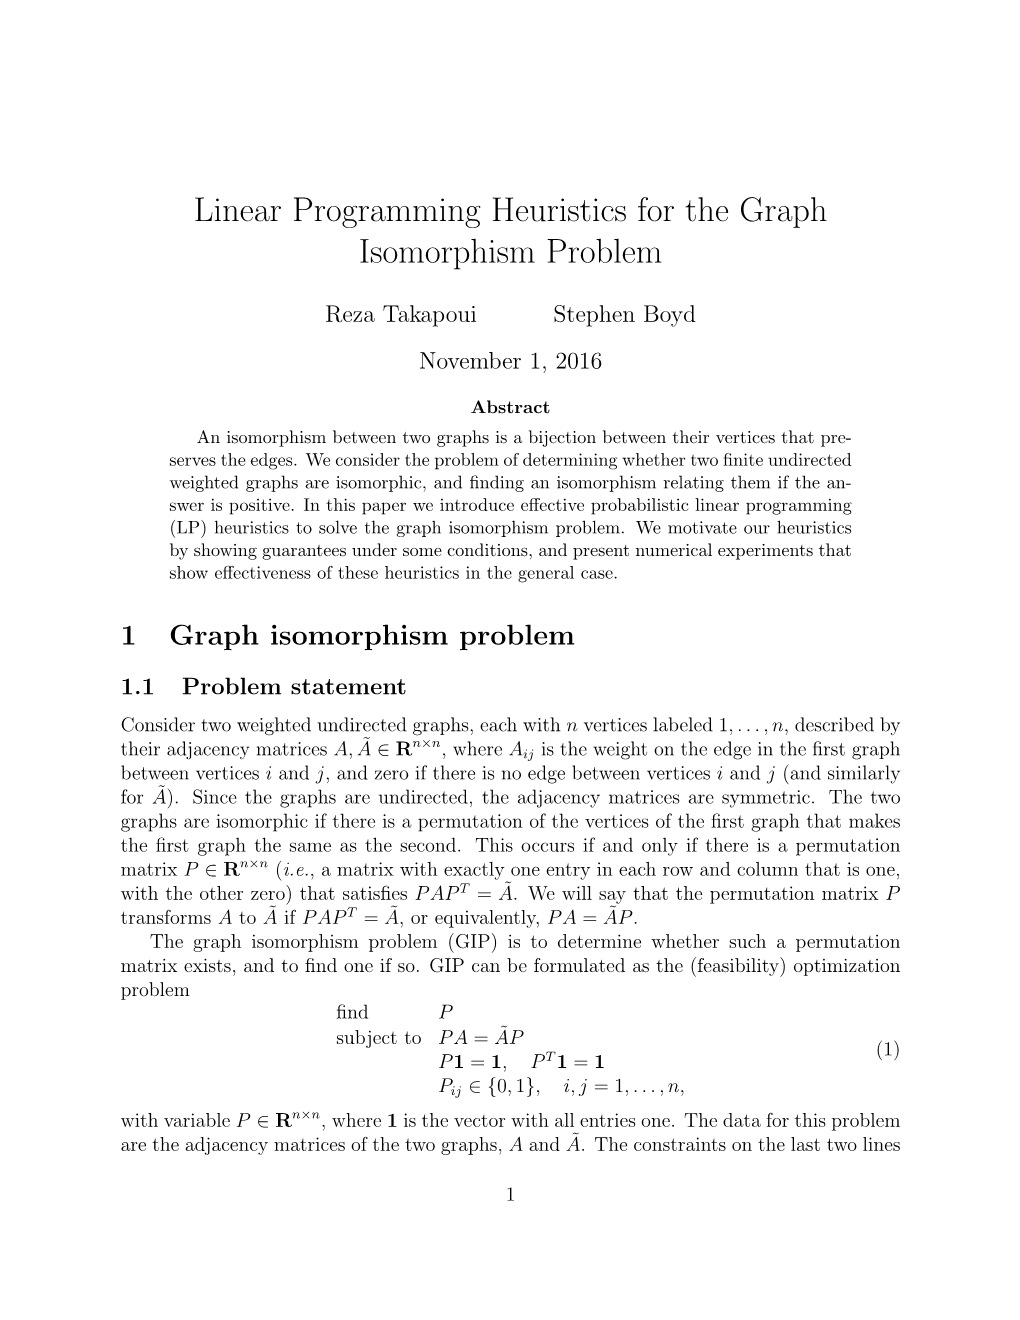 Linear Programming Heuristics for the Graph Isomorphism Problem